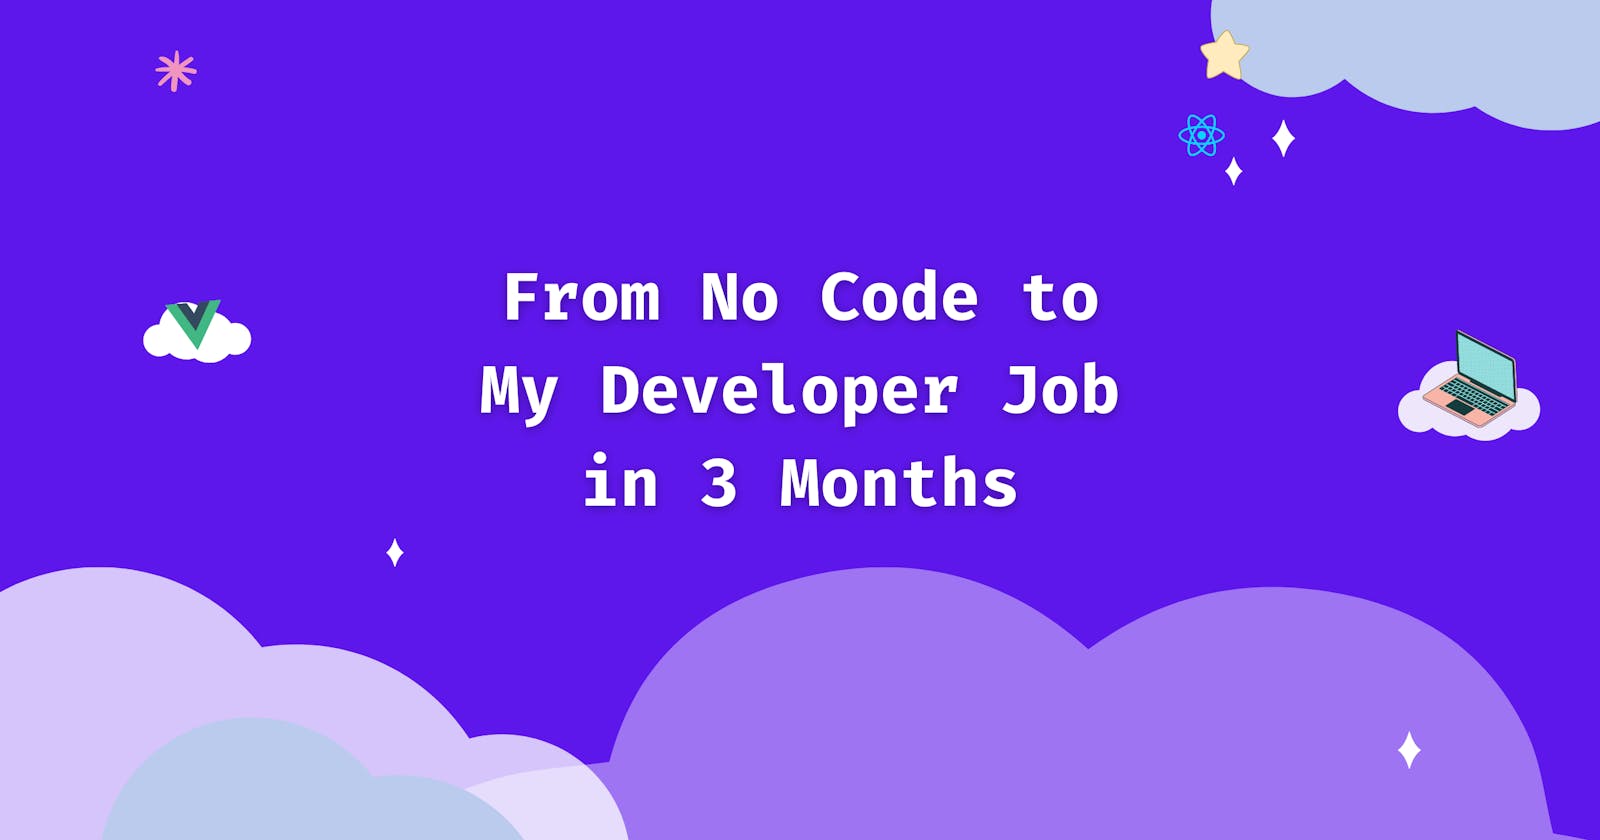 From No Code to My Developer Job in 3 Months